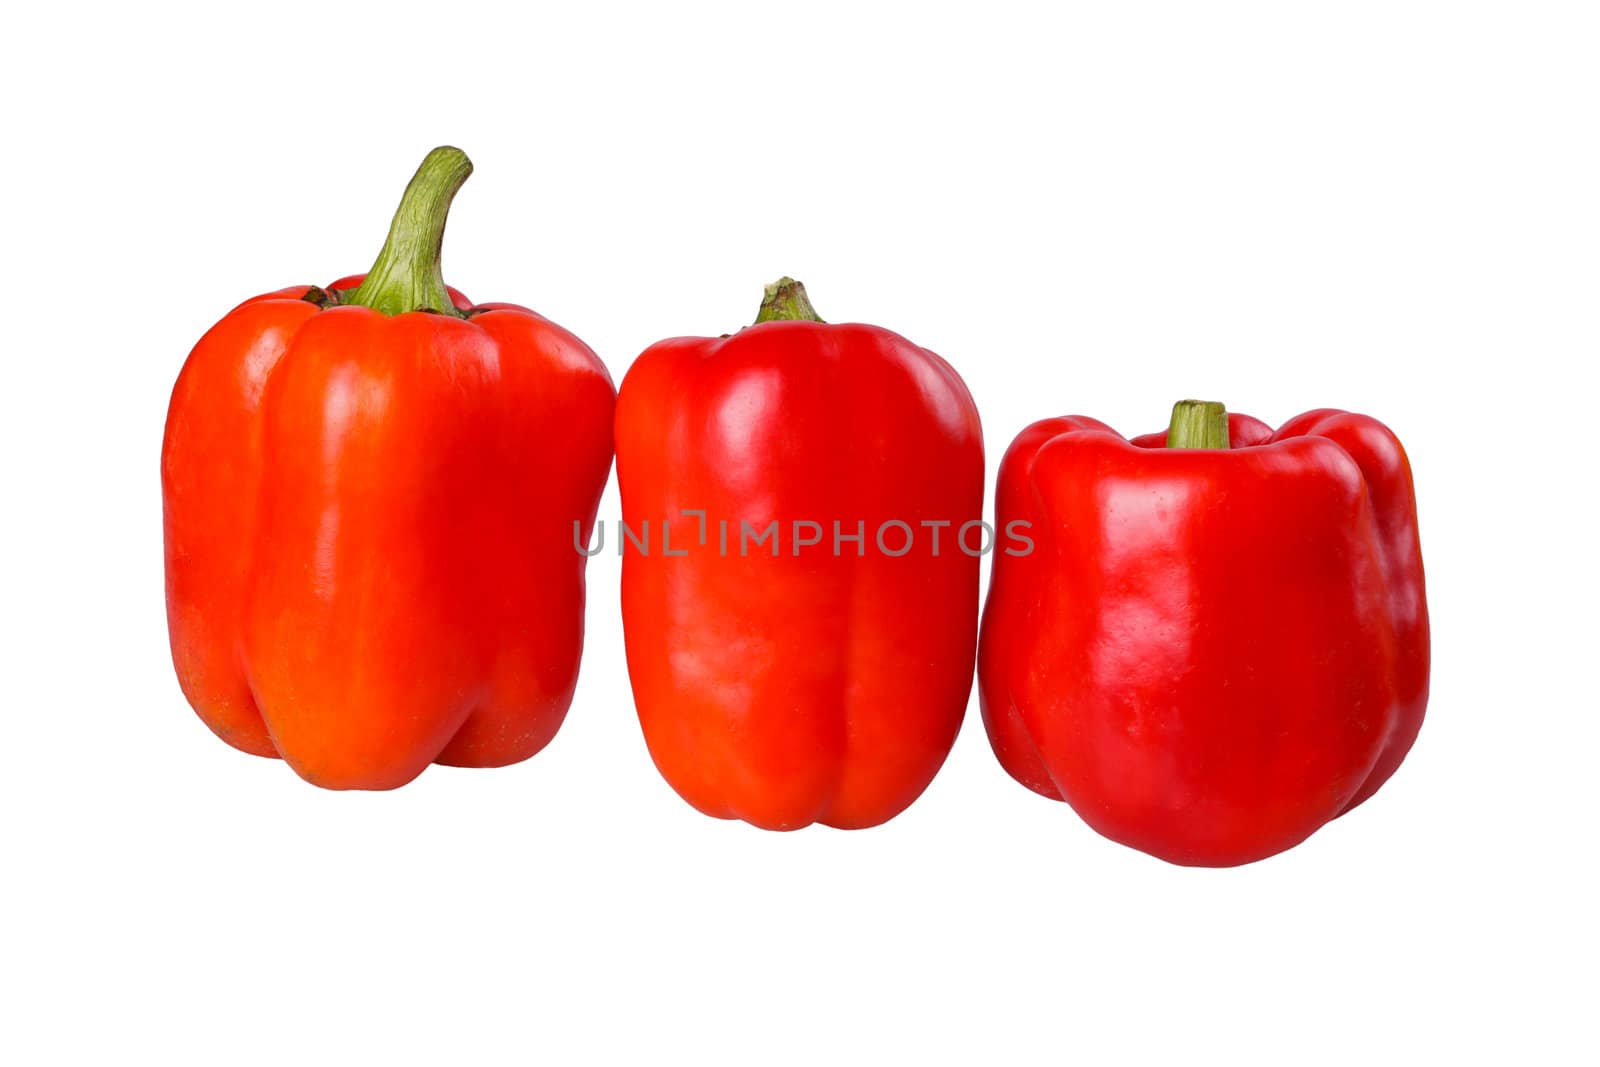 Three red, ripe bell pepper fruits (Capsicum annuum) in a row isolated against a white background